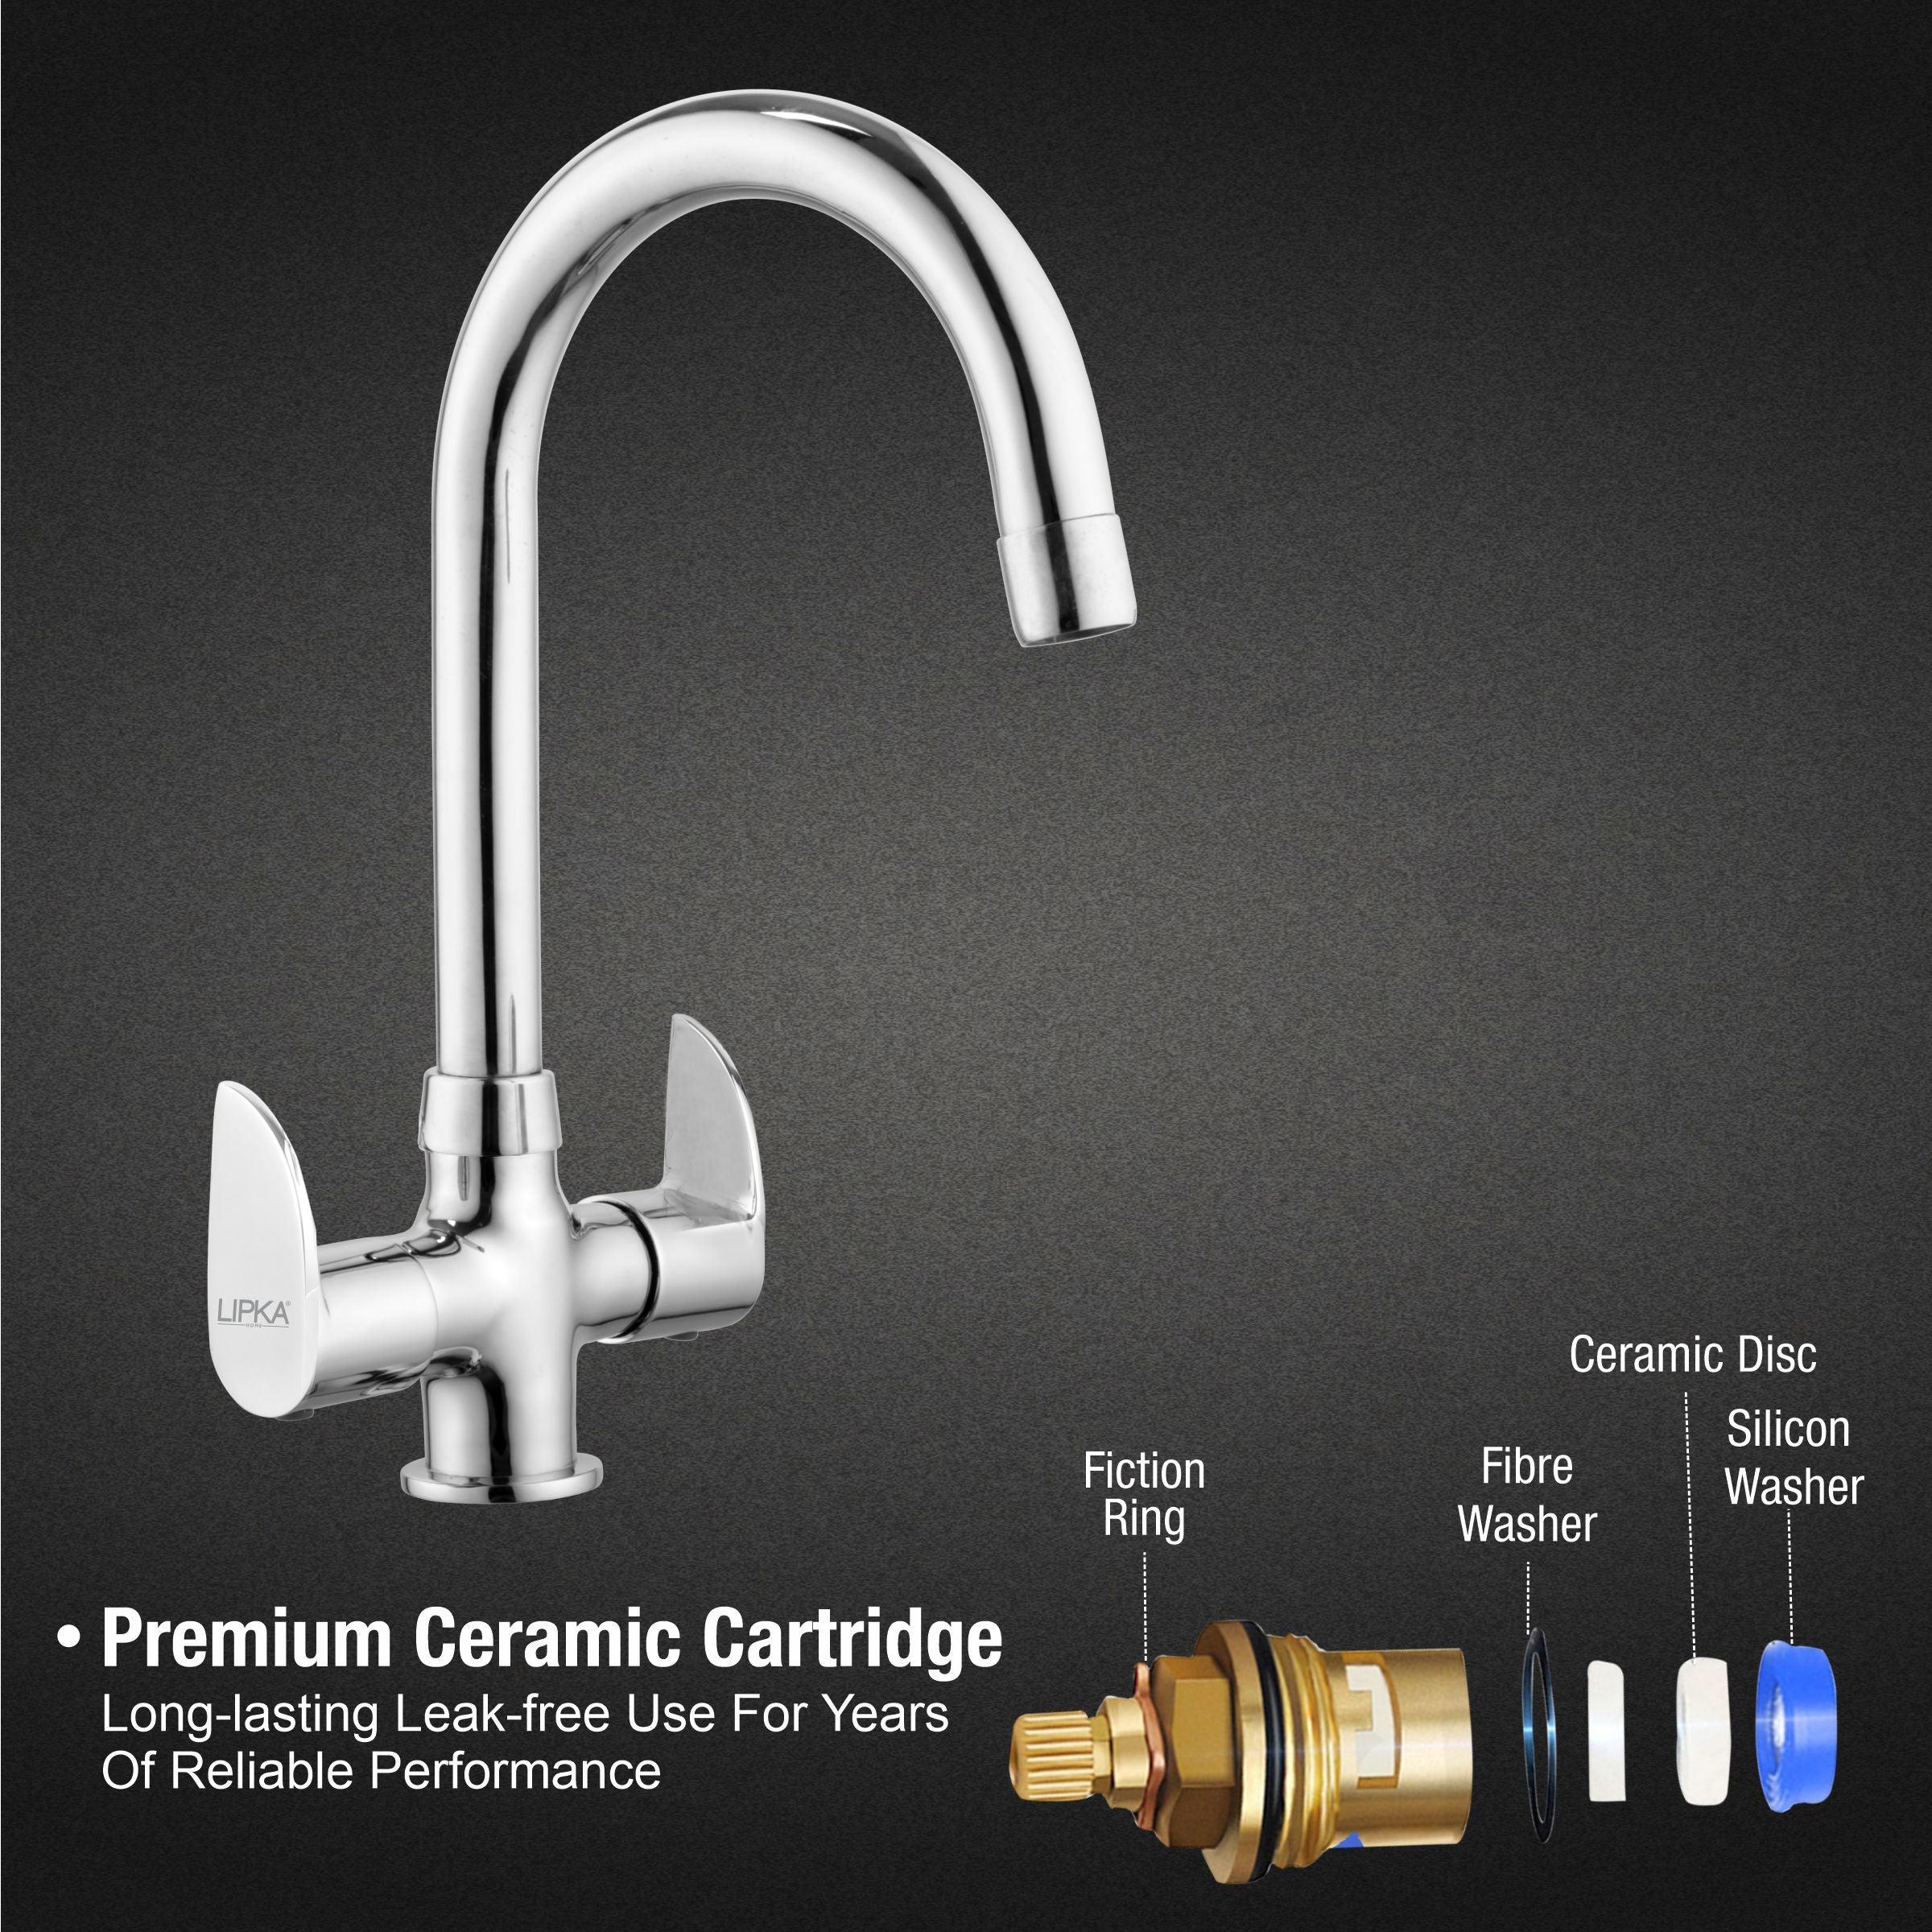 Arise Centre Hole Basin Mixer Brass Faucet with Round Swivel Spout (15 Inches) - LIPKA - Lipka Home